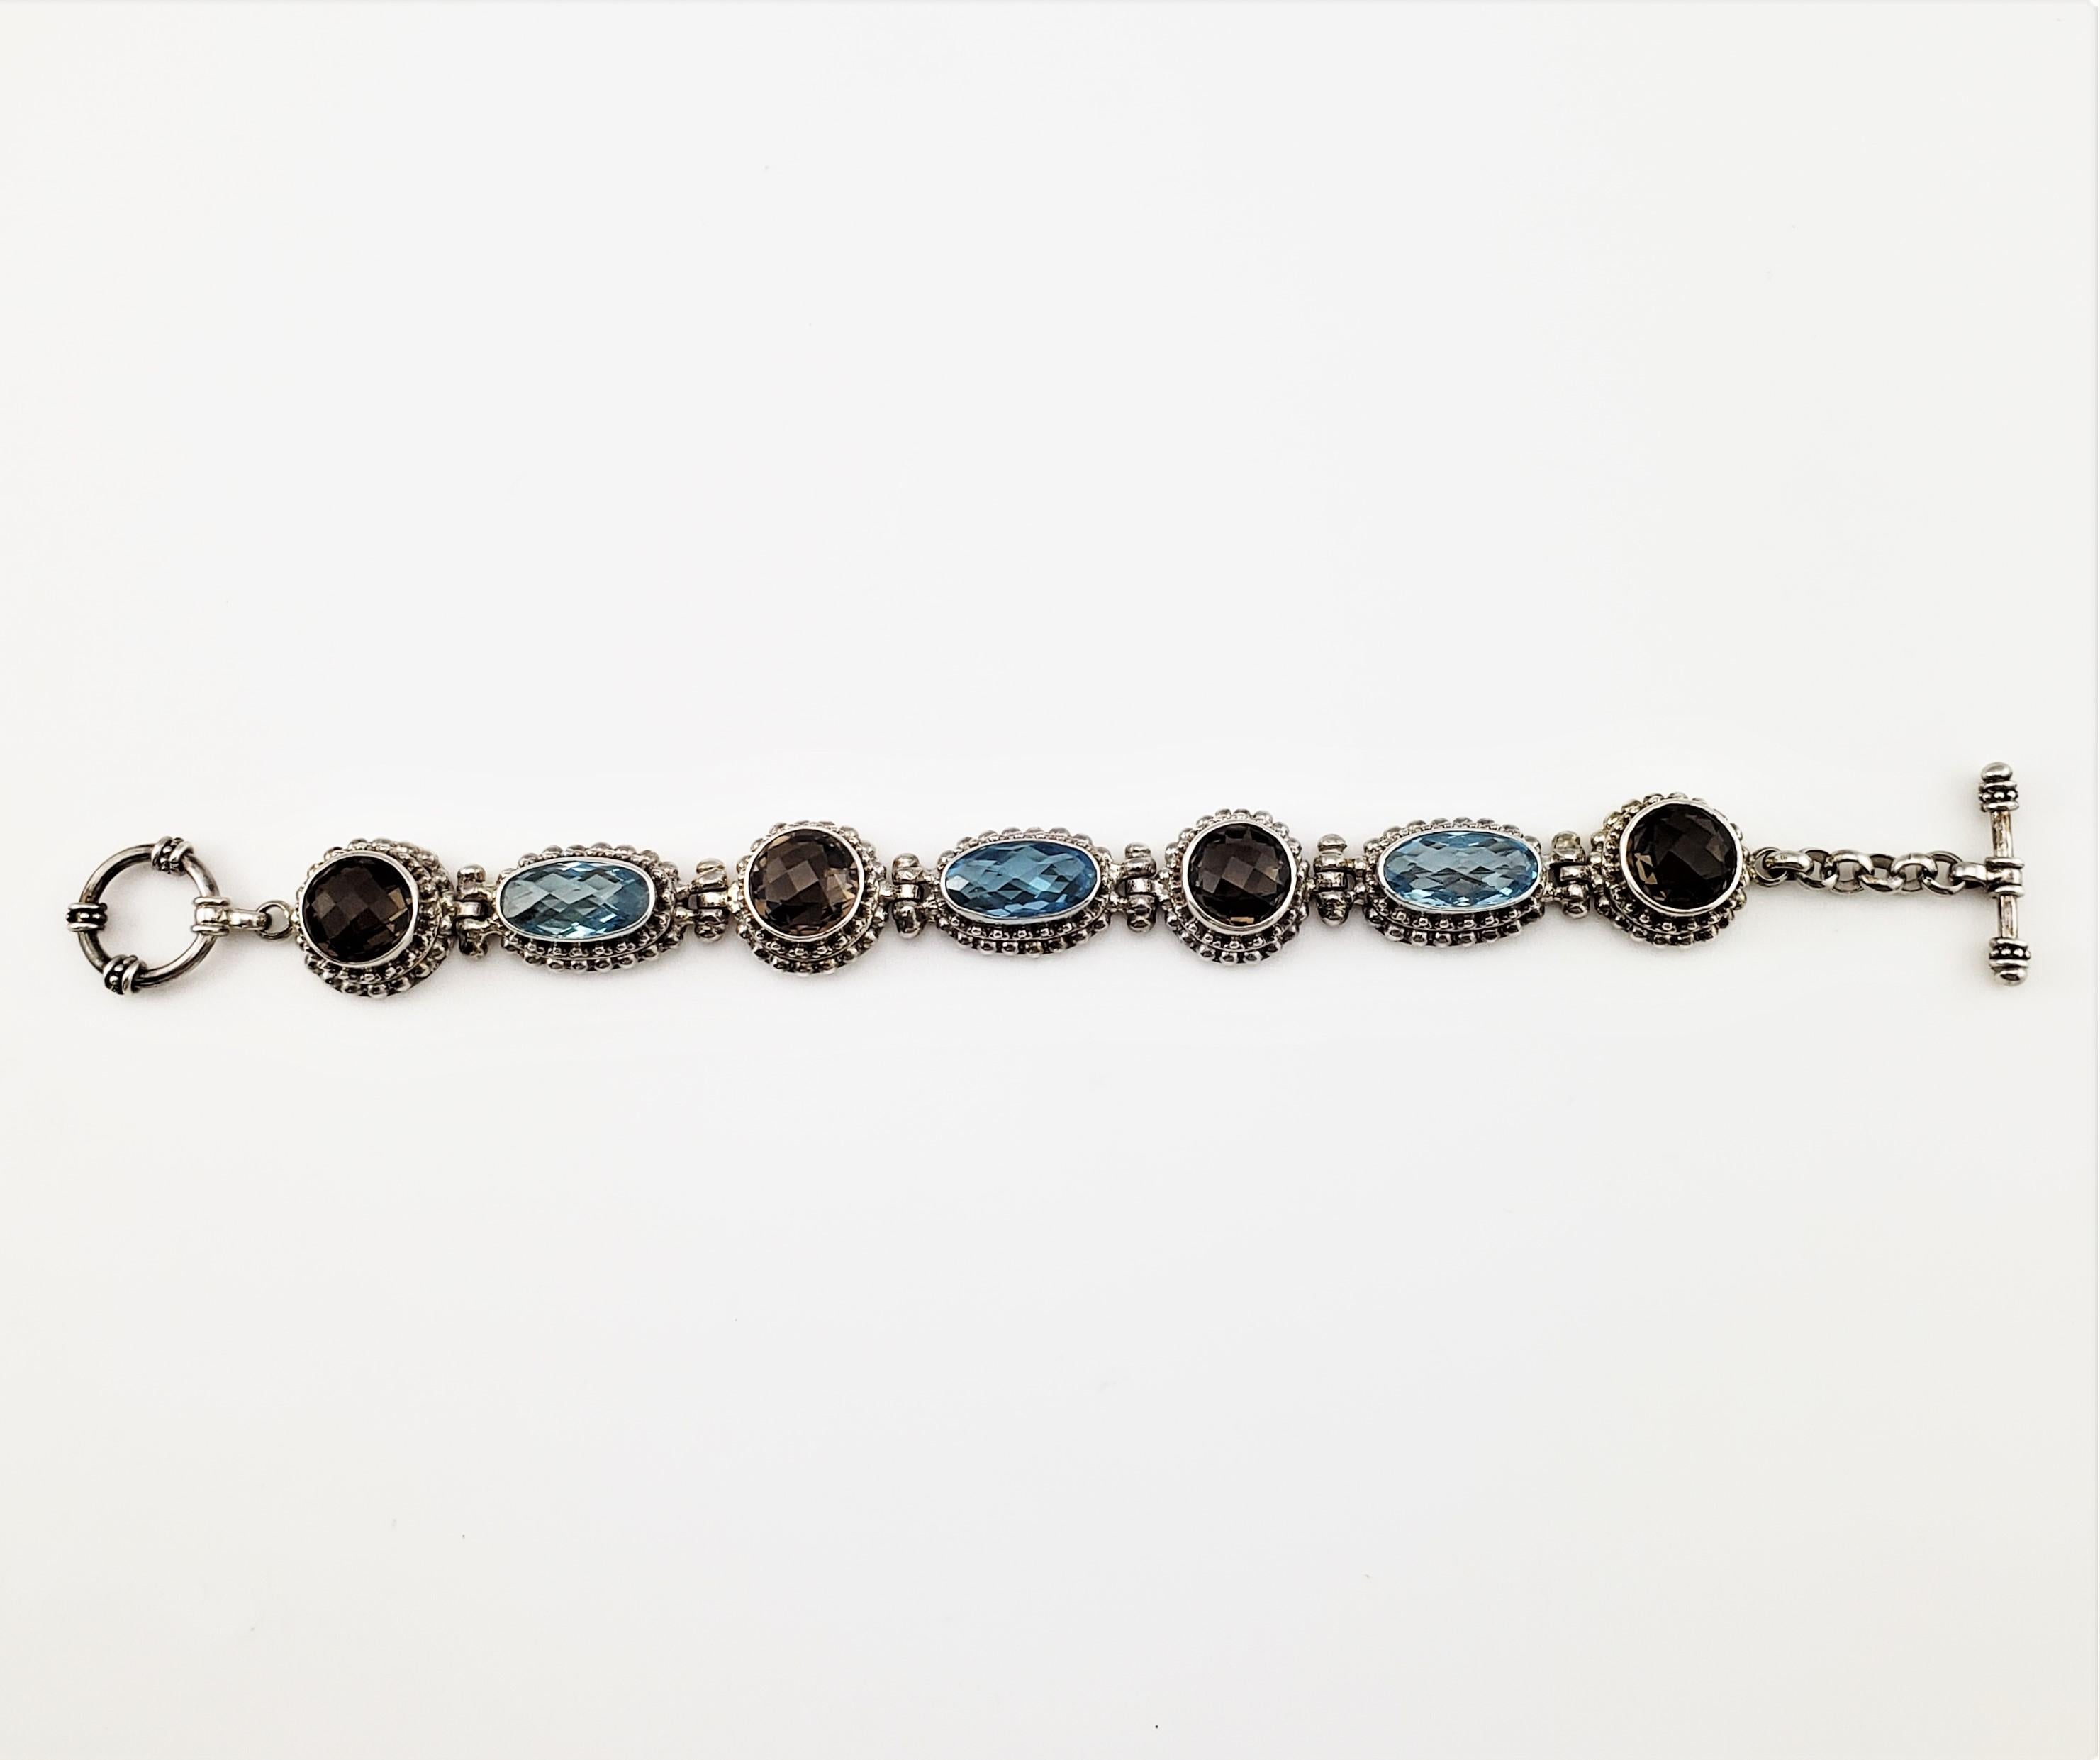 Bali Indonesia Sterling Silver Blue and Brown Topaz Flexible Toggle Bracelet 1